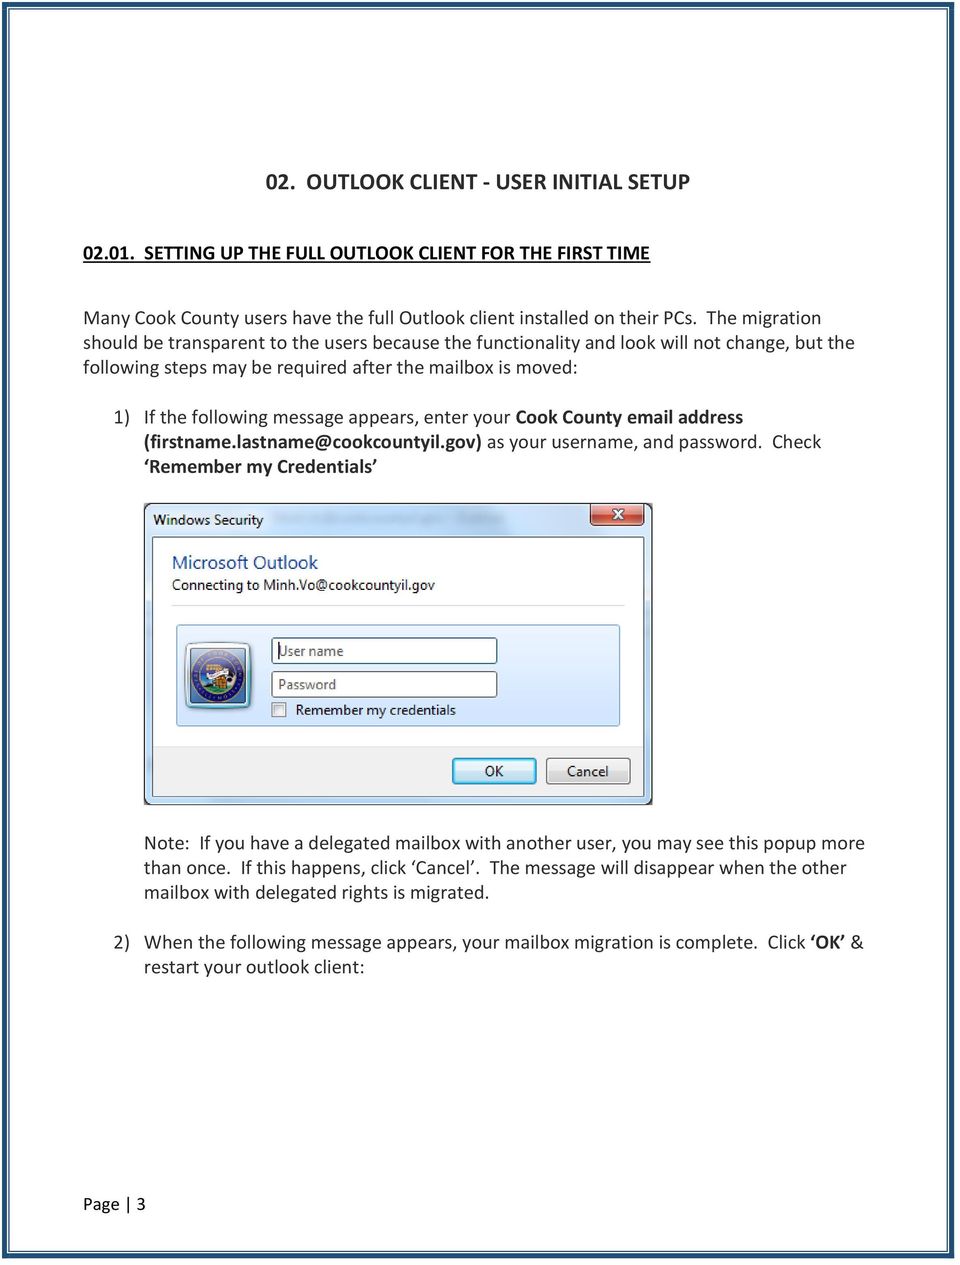 appears, enter your Cook County email address (firstname.lastname@cookcountyil.gov) as your username, and password.